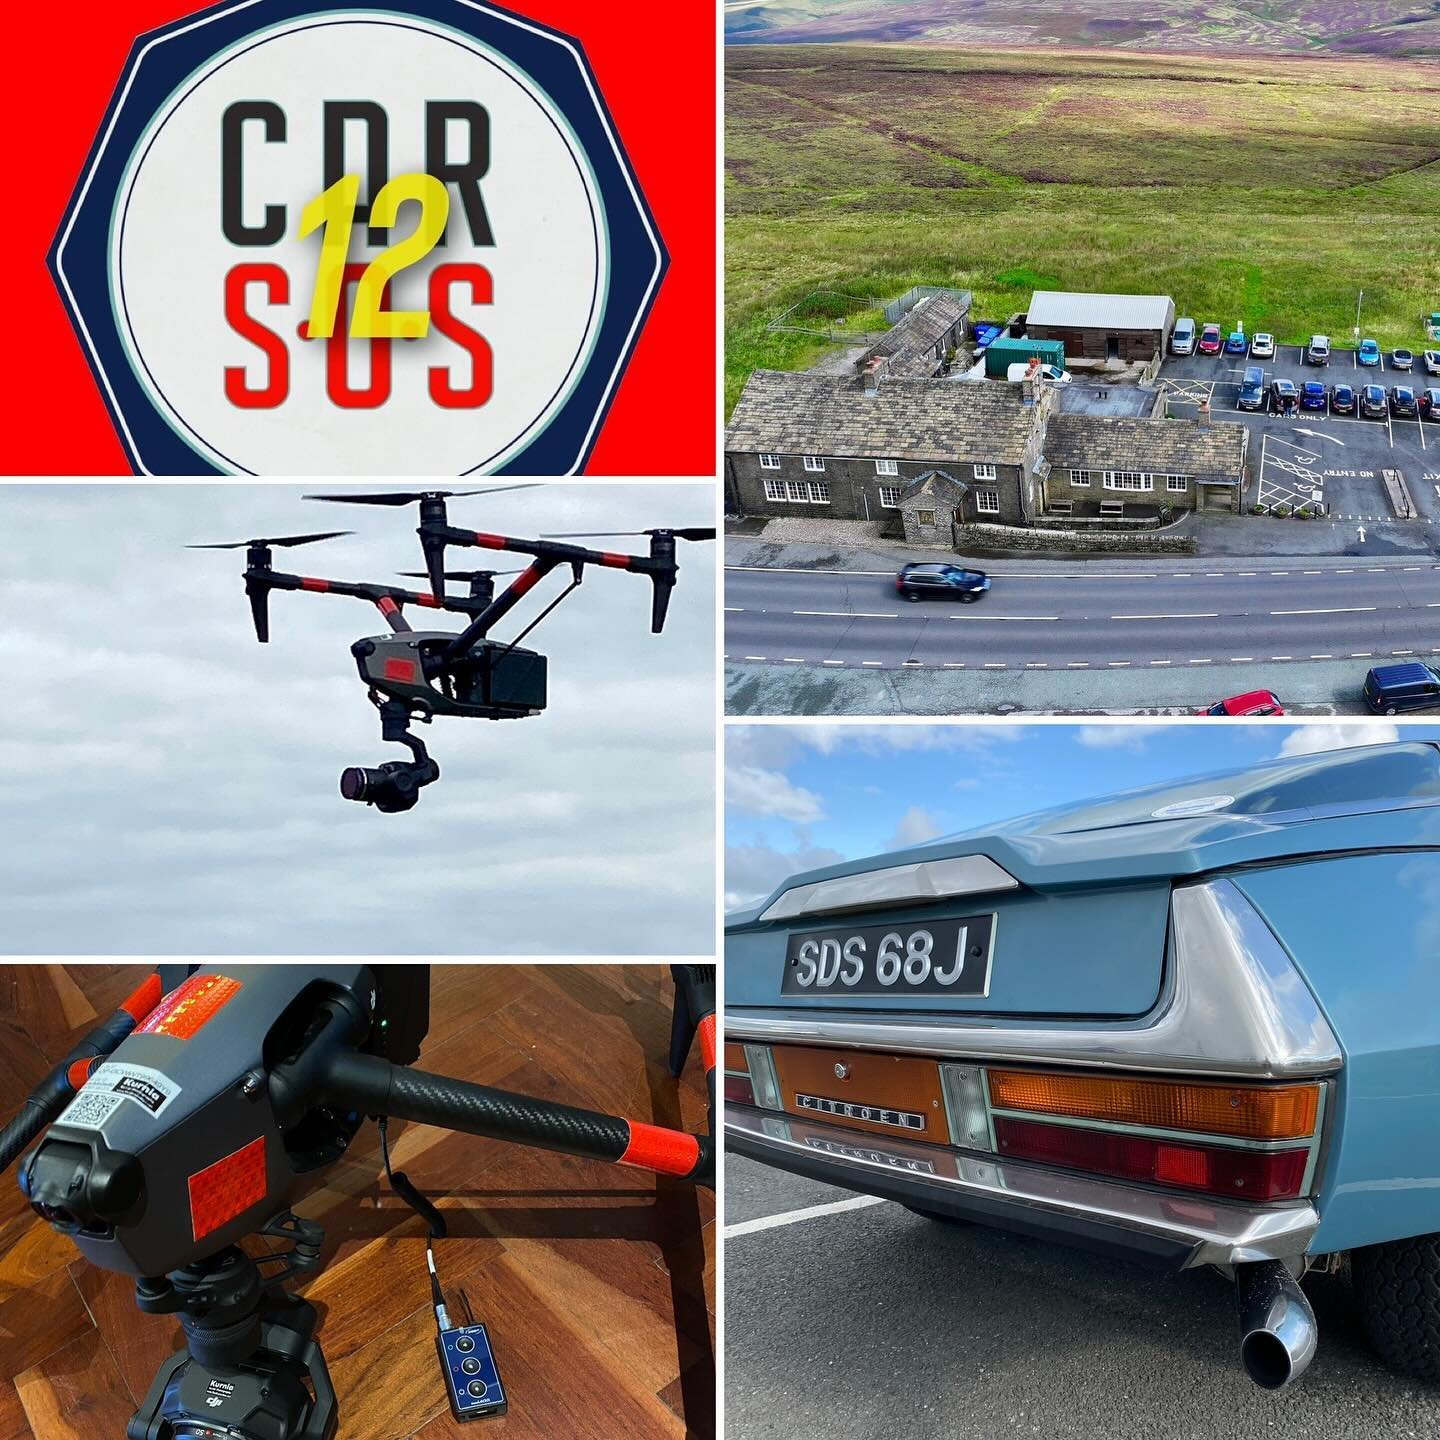 Buckle up petrolheads. What a car! The legendary Citroen SM tonight on the UK Nat Geo channel at 8pm. Great to have worked with Apex Cameras on this shoot 🎥🎬

#thedroneman  #kurniaaerialphotography #DroneProduction #AerialProduction #DroneVideograp